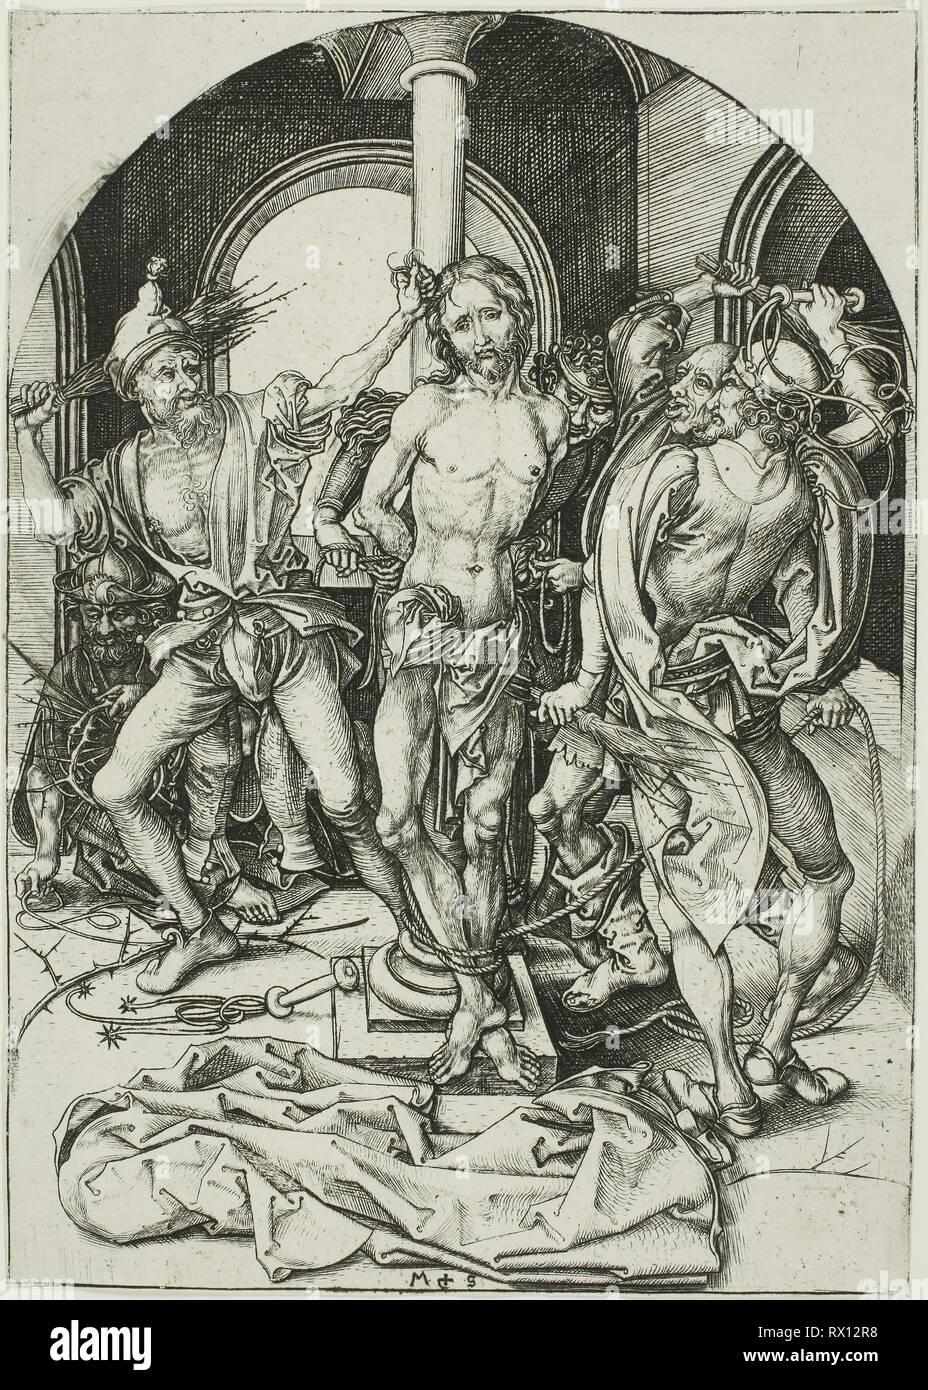 The Flagellation, from The Passion. Martin Schongauer; German, c. 1450-1491. Date: 1475-1486. Dimensions: 164 x 116 mm (sheet trimmed within plate mark). Engraving on paper. Origin: Germany. Museum: The Chicago Art Institute. Stock Photo